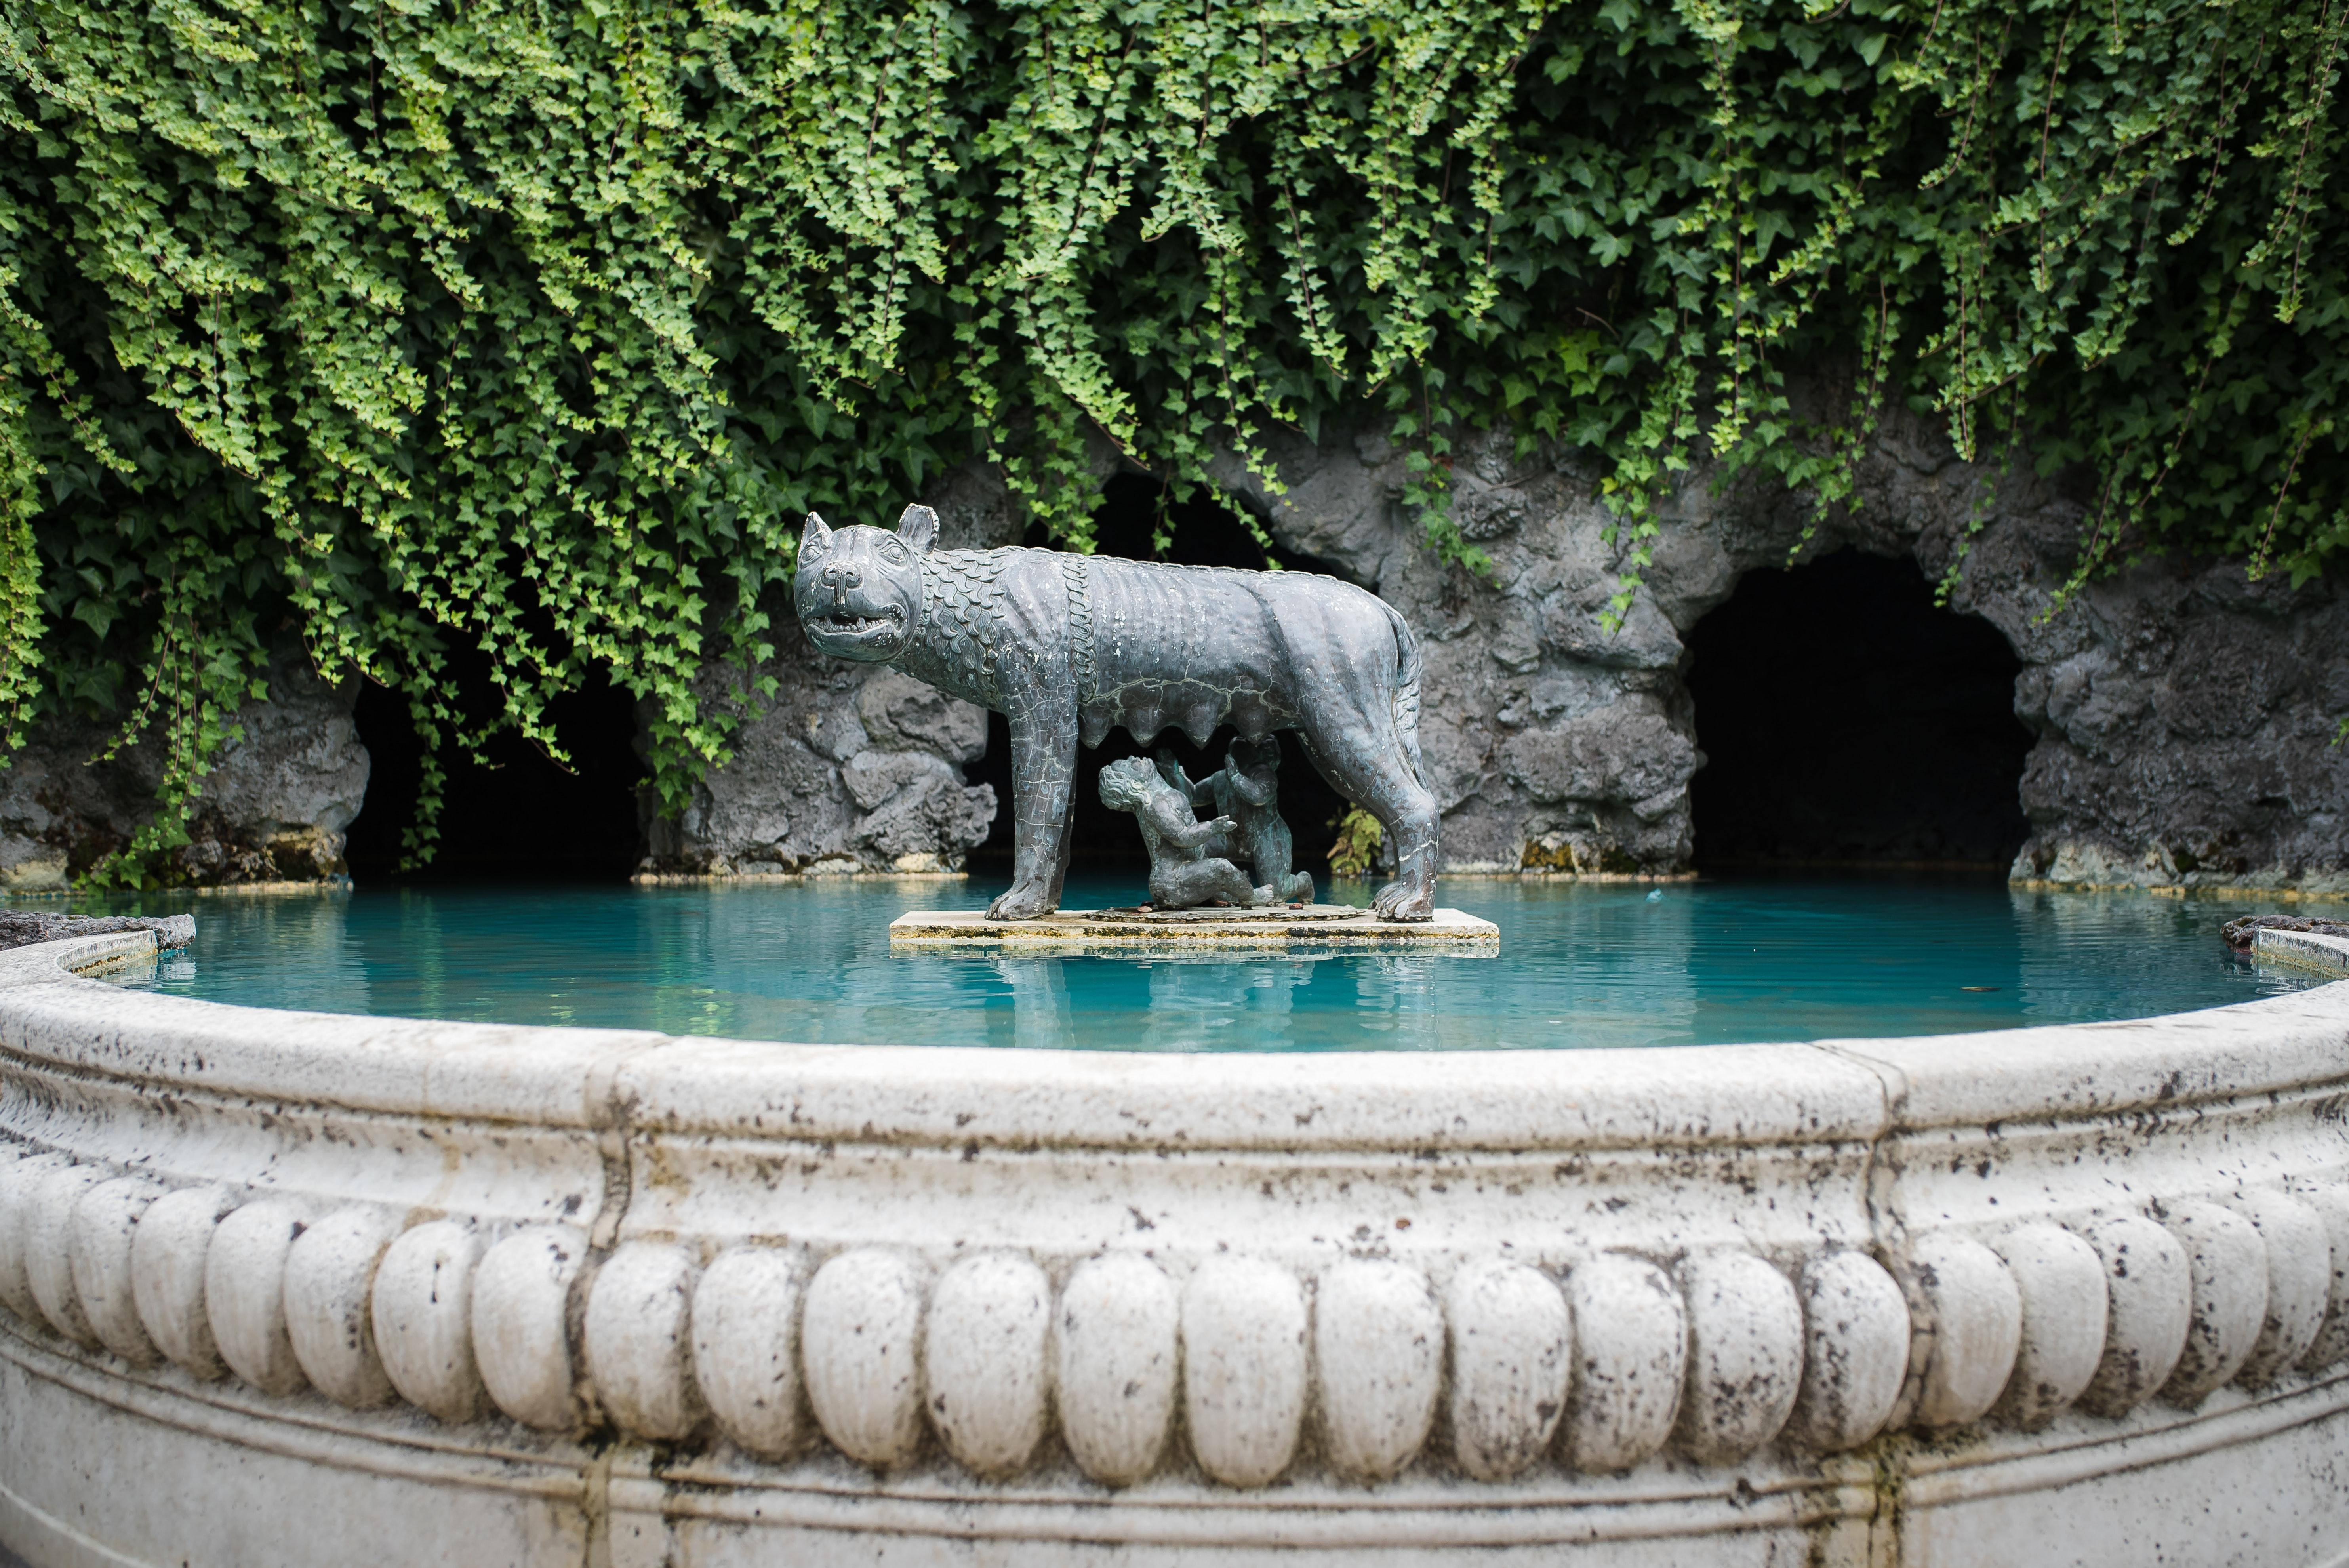 Statue of the Capitoline Wolf sculpture in a pool of water